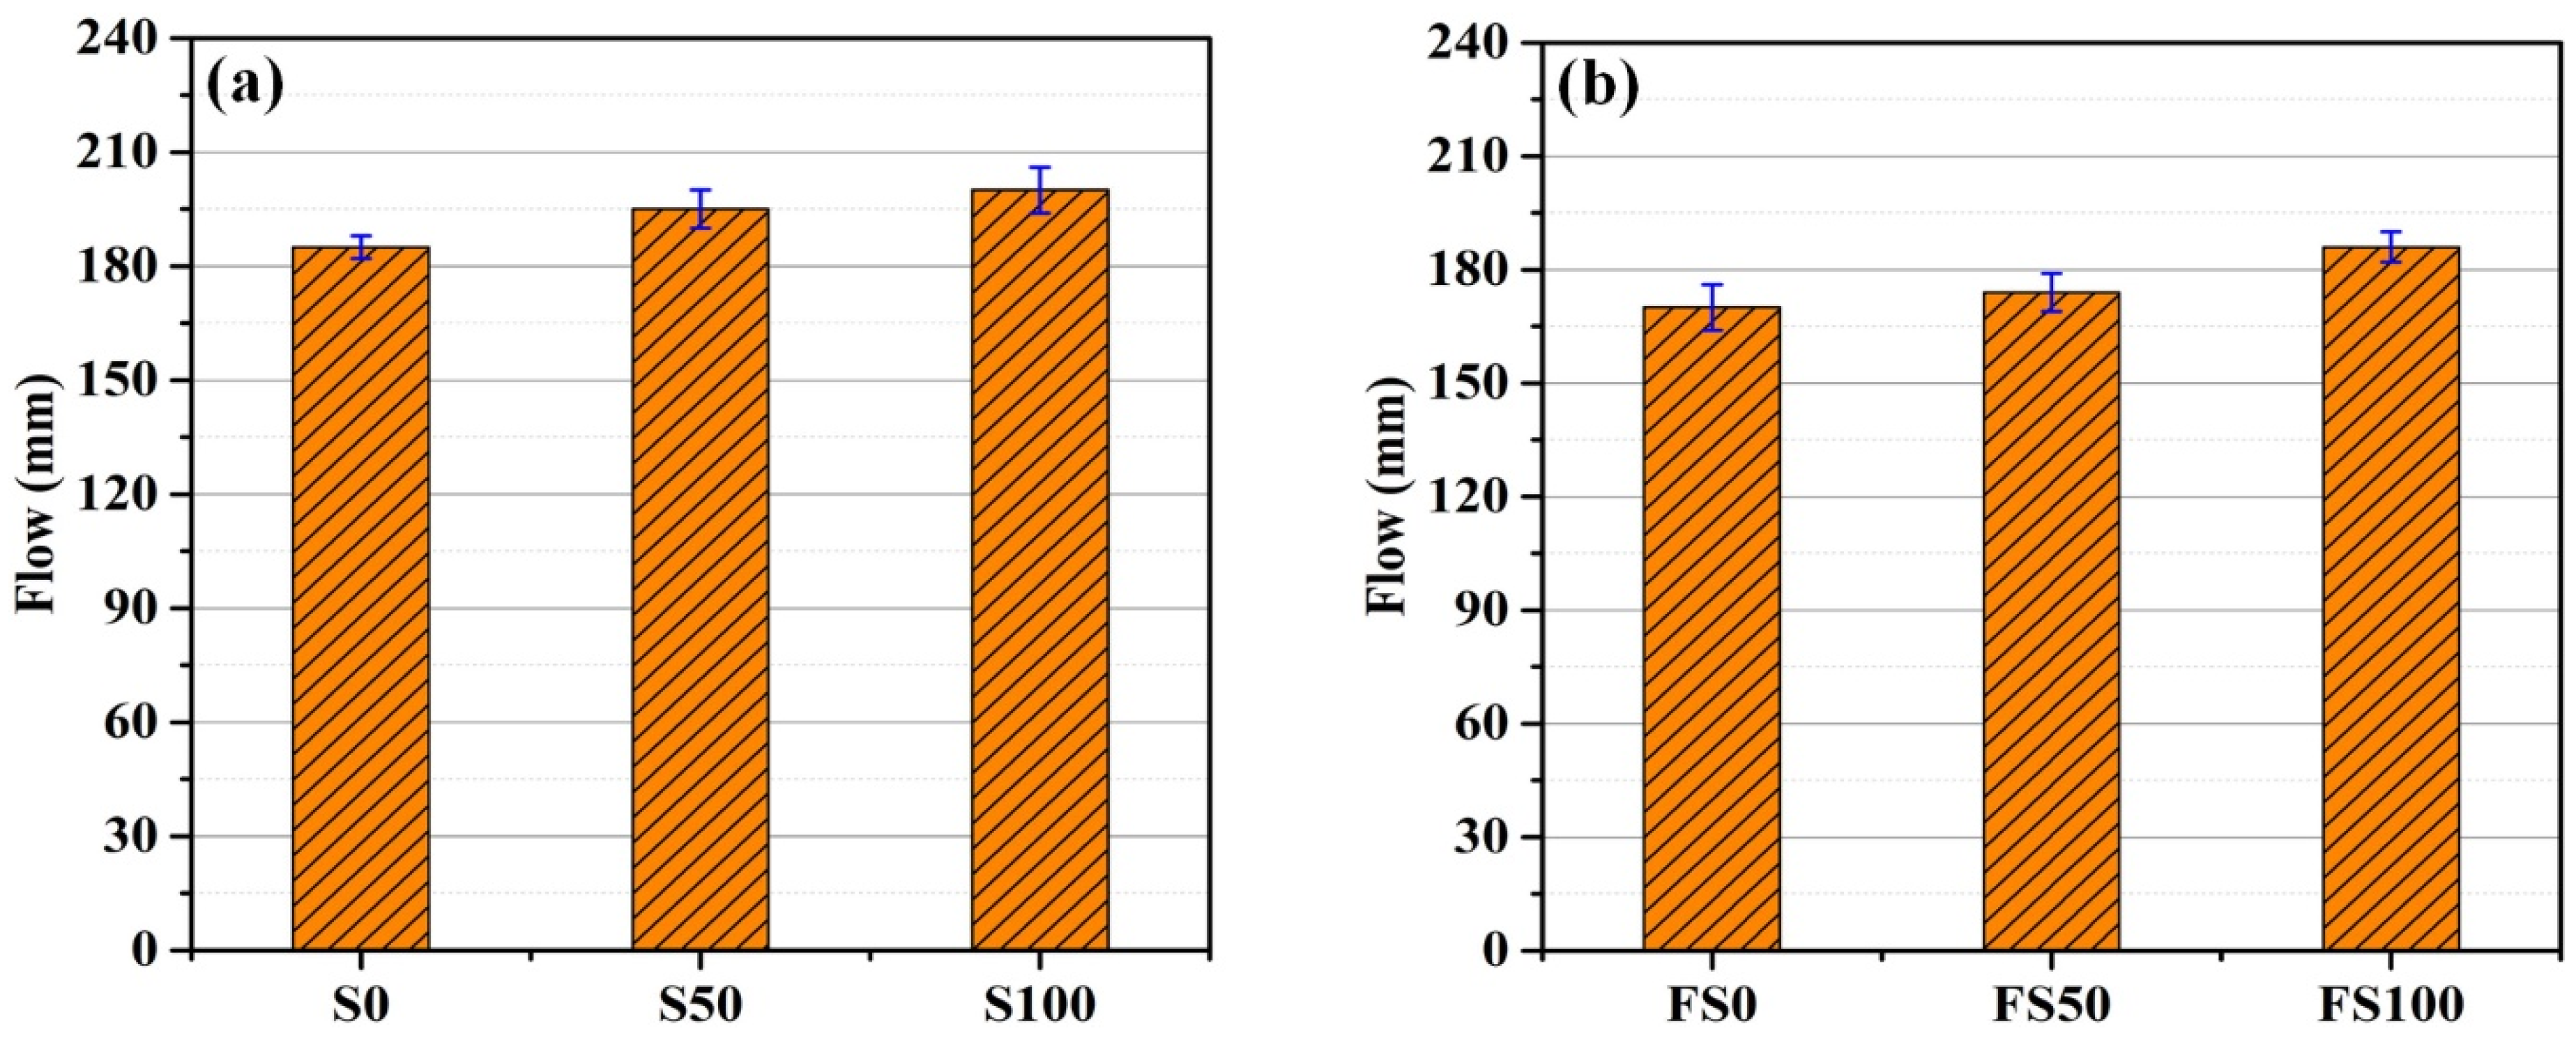 Materials Free Full Text Mechanical Properties And Sulfate Resistance Of High Volume Fly Ash Cement Mortars With Air Cooled Slag As Fine Aggregate And Polypropylene Fibers Html